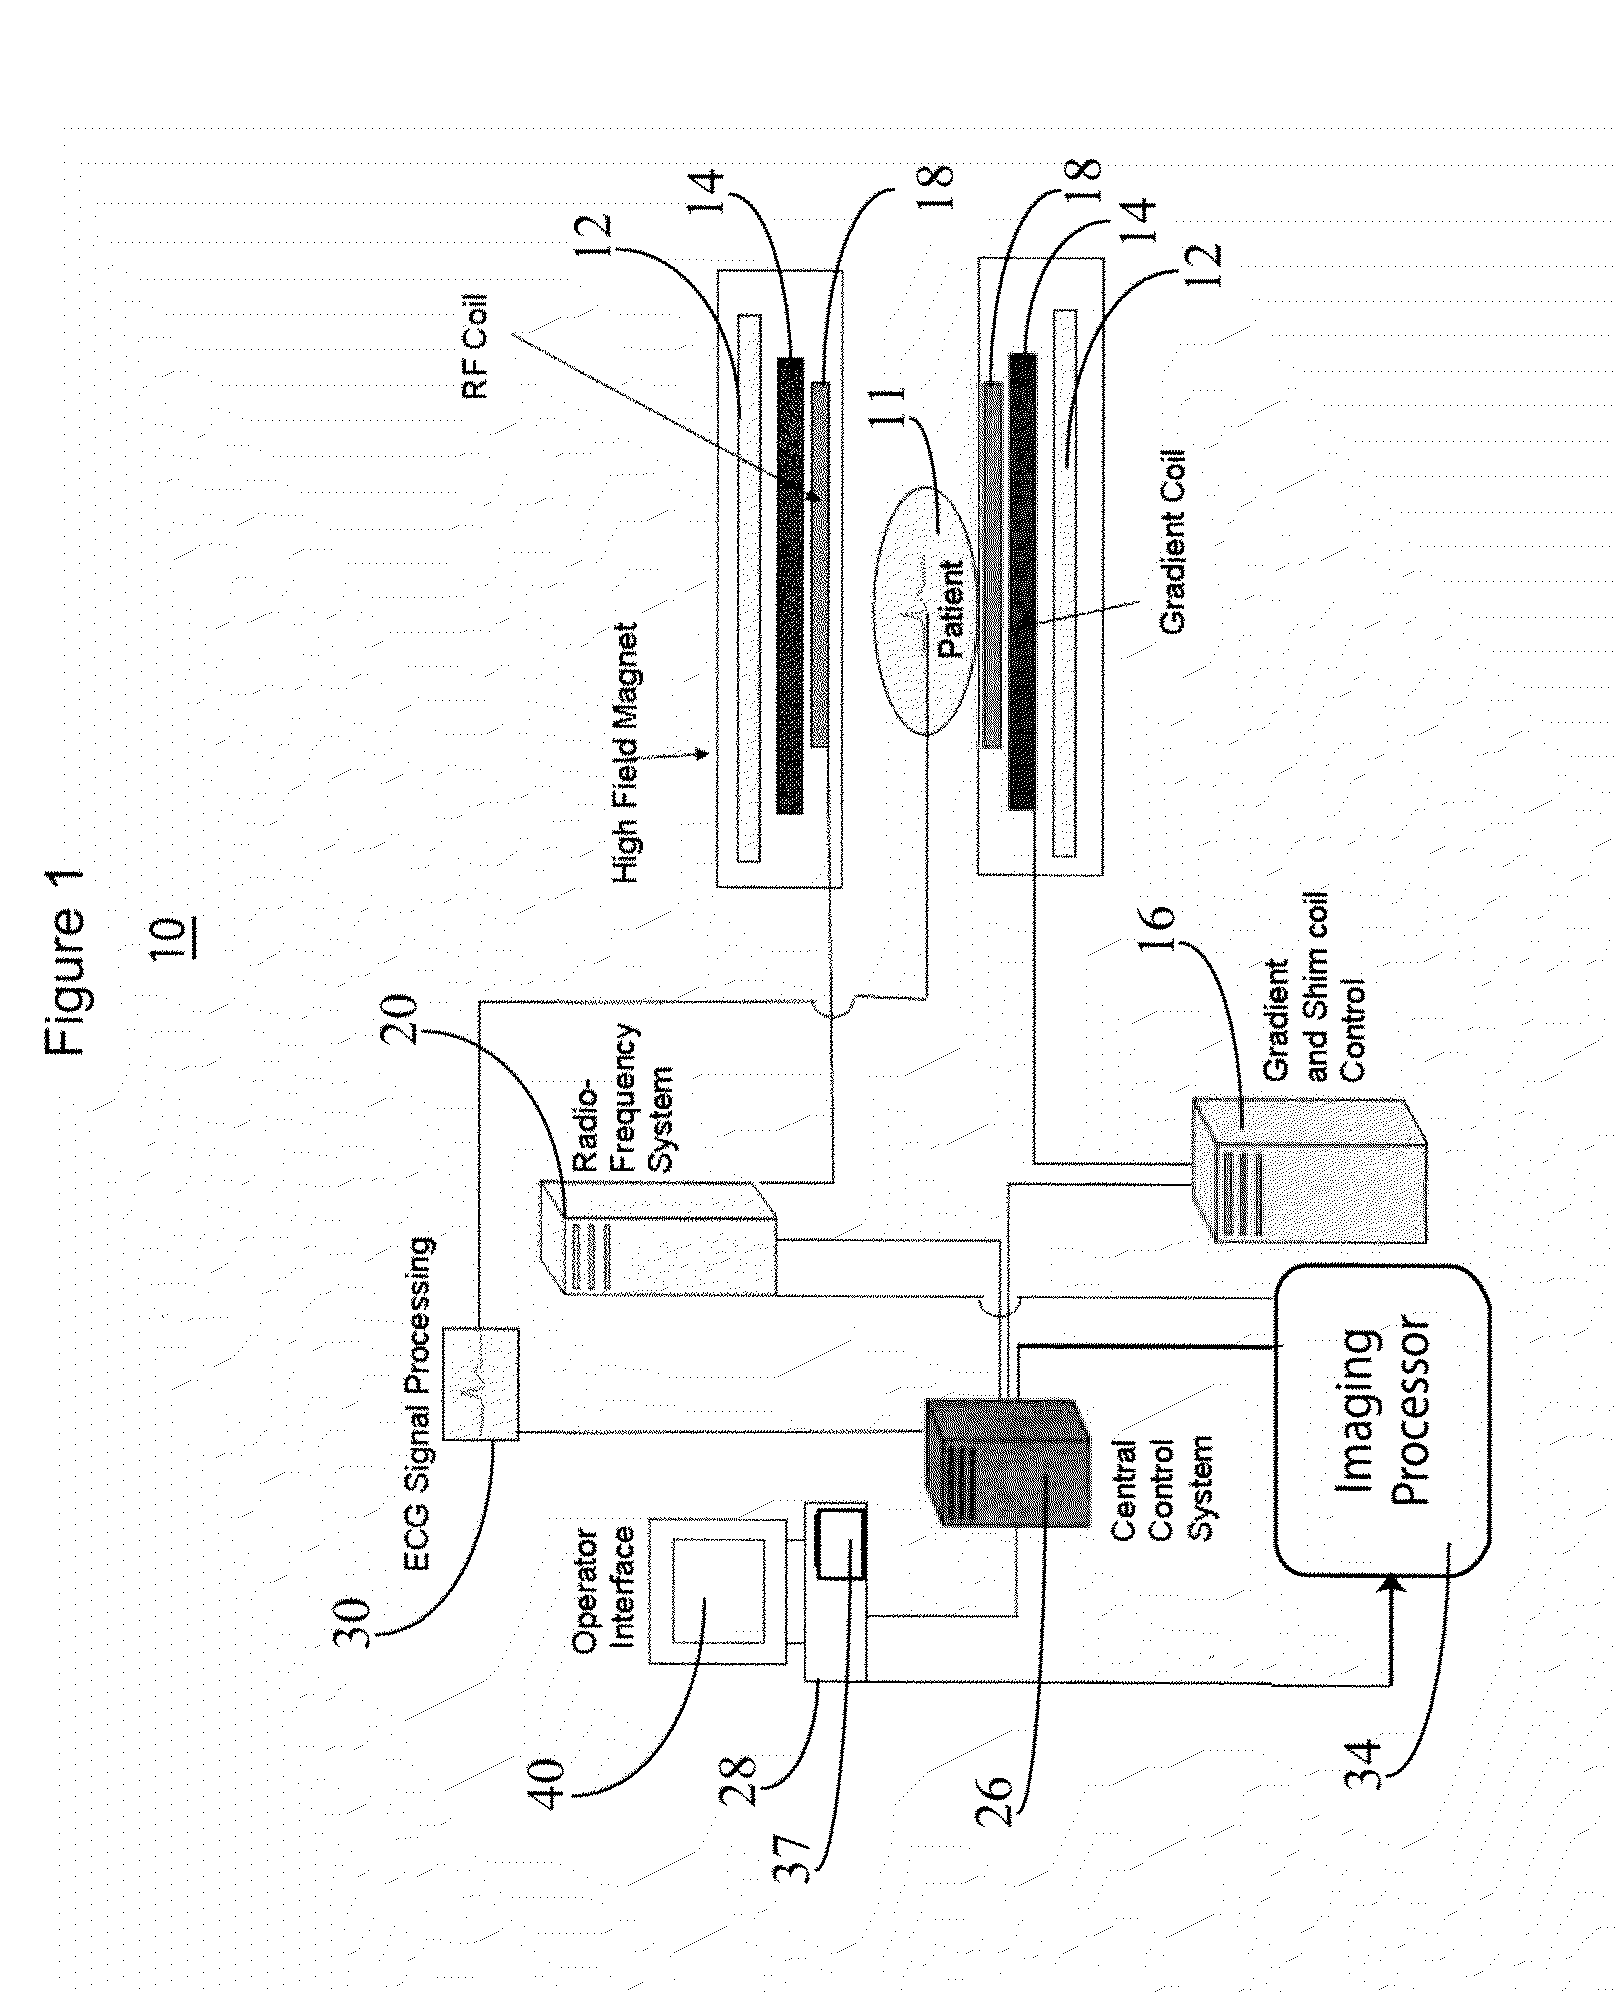 System for Image Acquisition With Fast Magnetic Resonance Gradient Echo Sequences